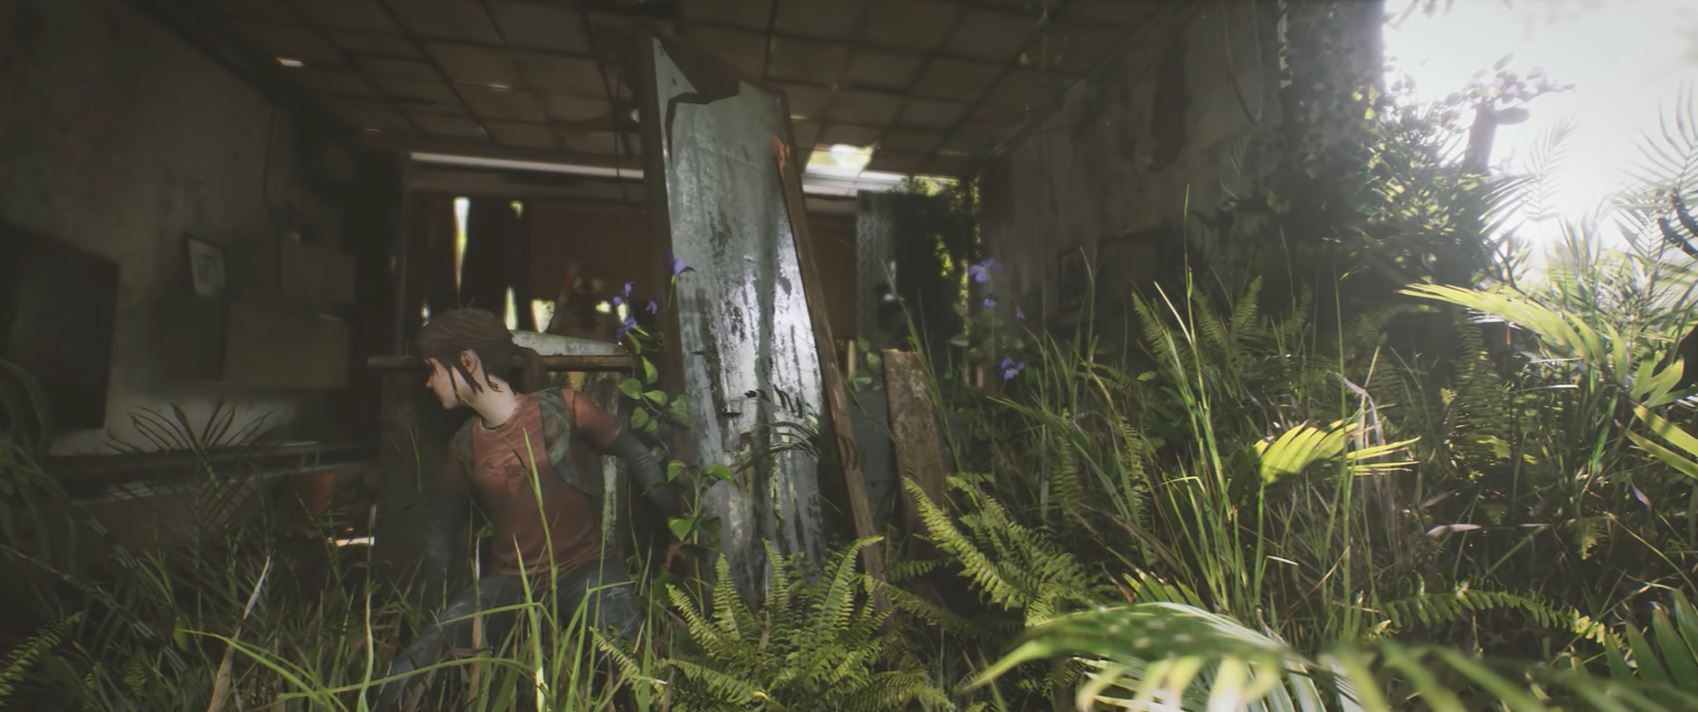 THE LAST OF US Remake Gameplay - Unreal Engine 5 Insane Showcase l Concept  Trailer 